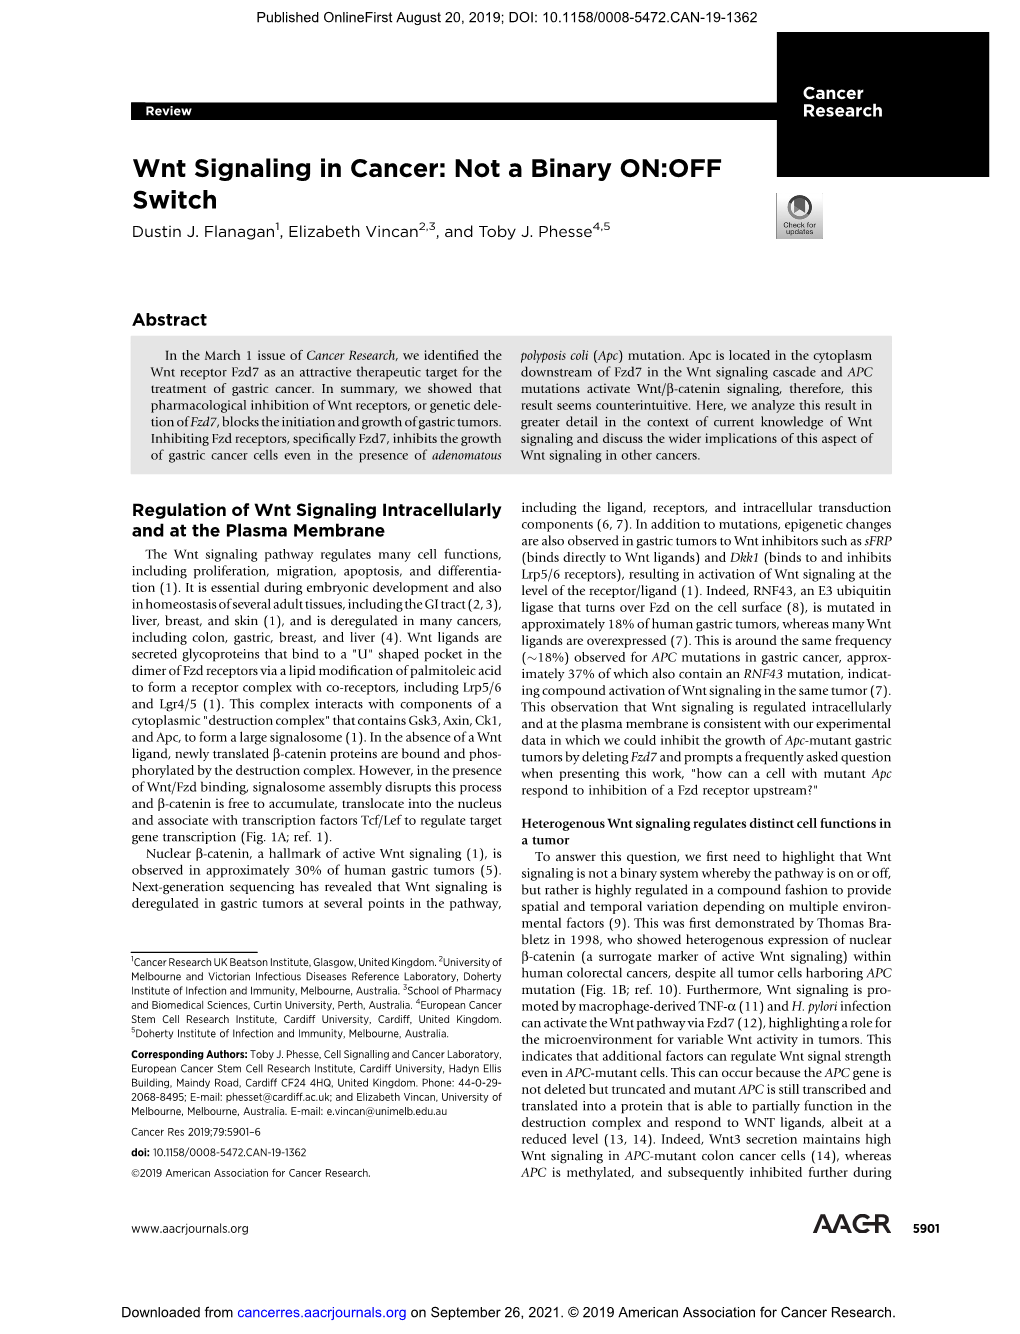 Wnt Signaling in Cancer: Not a Binary ON:OFF Switch Dustin J